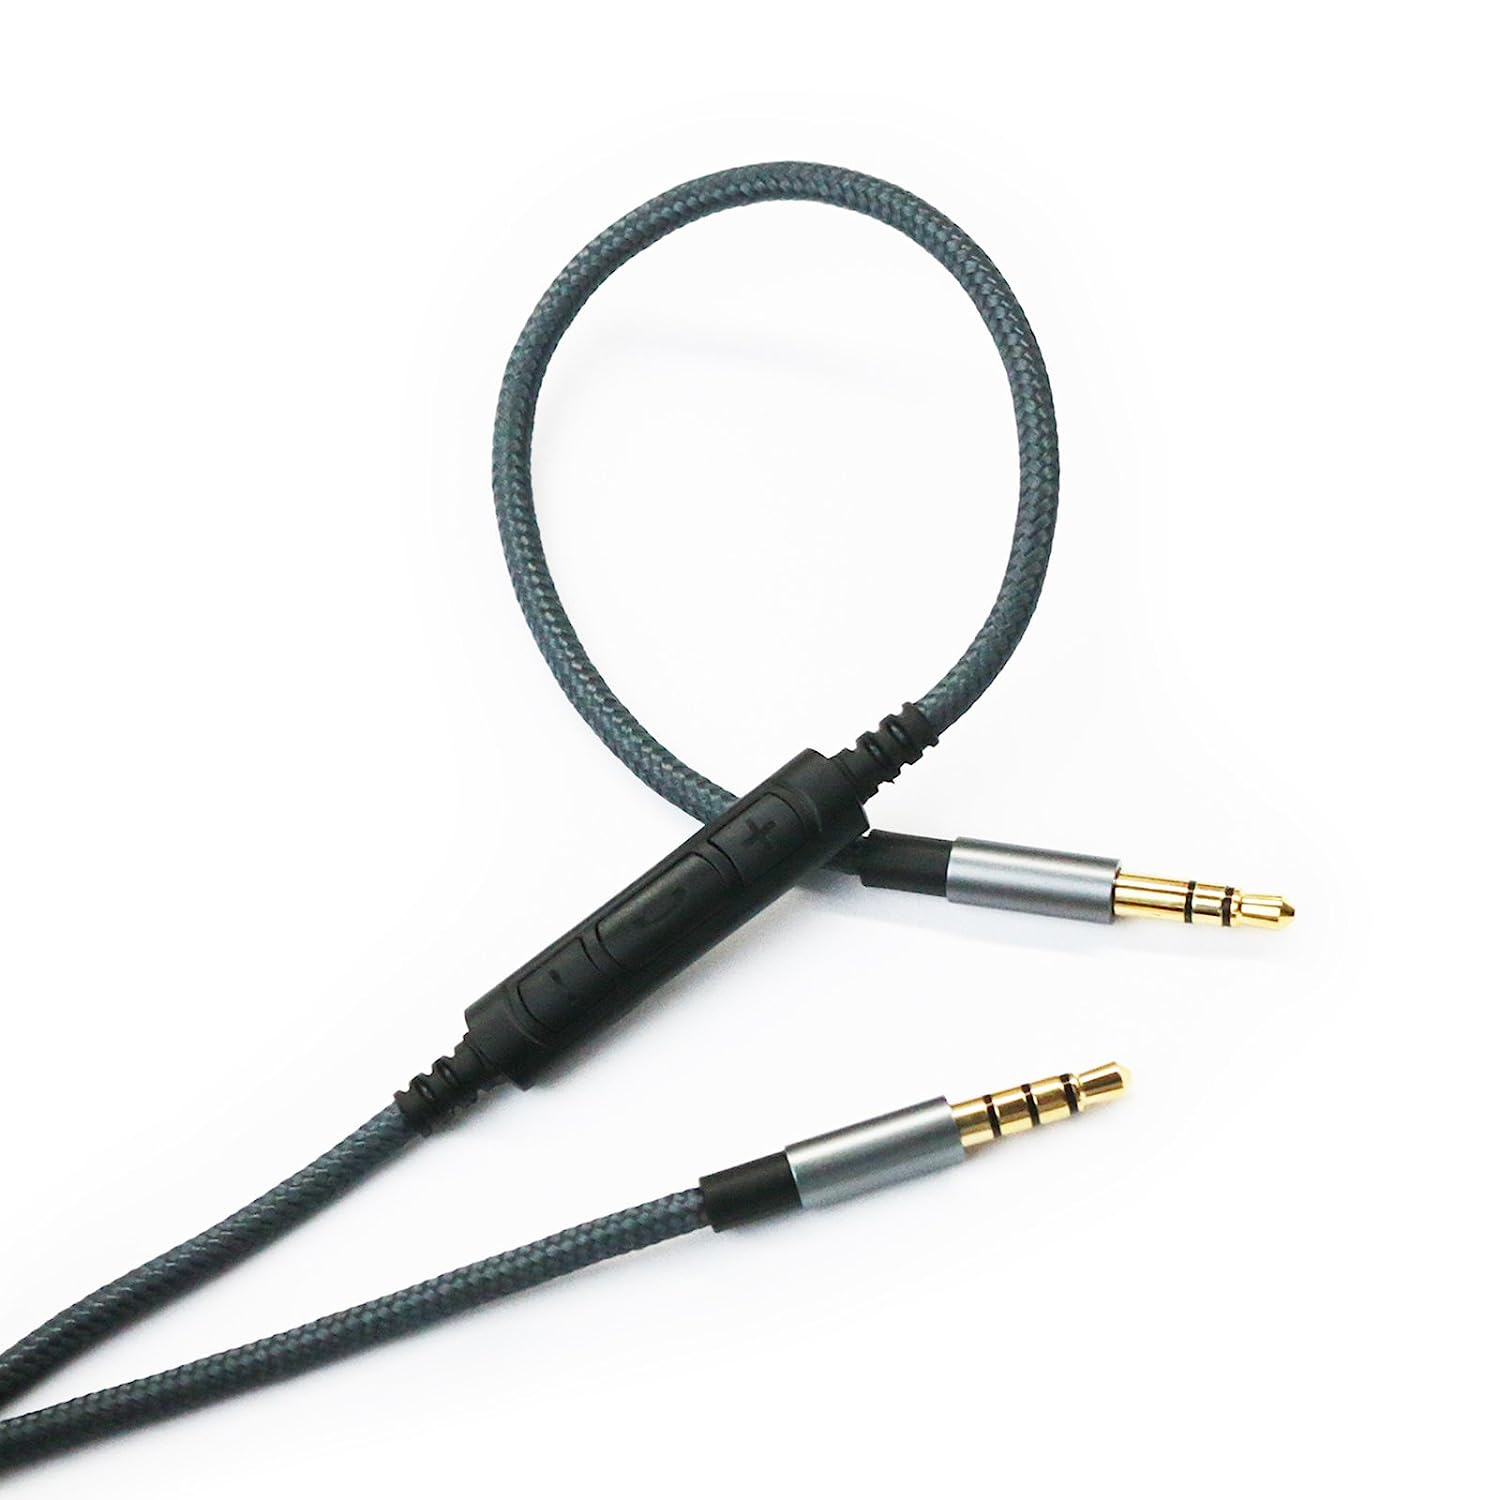 NewFantasia 3.5mm to 3.5mm Male Audio Cable Compatible [...]